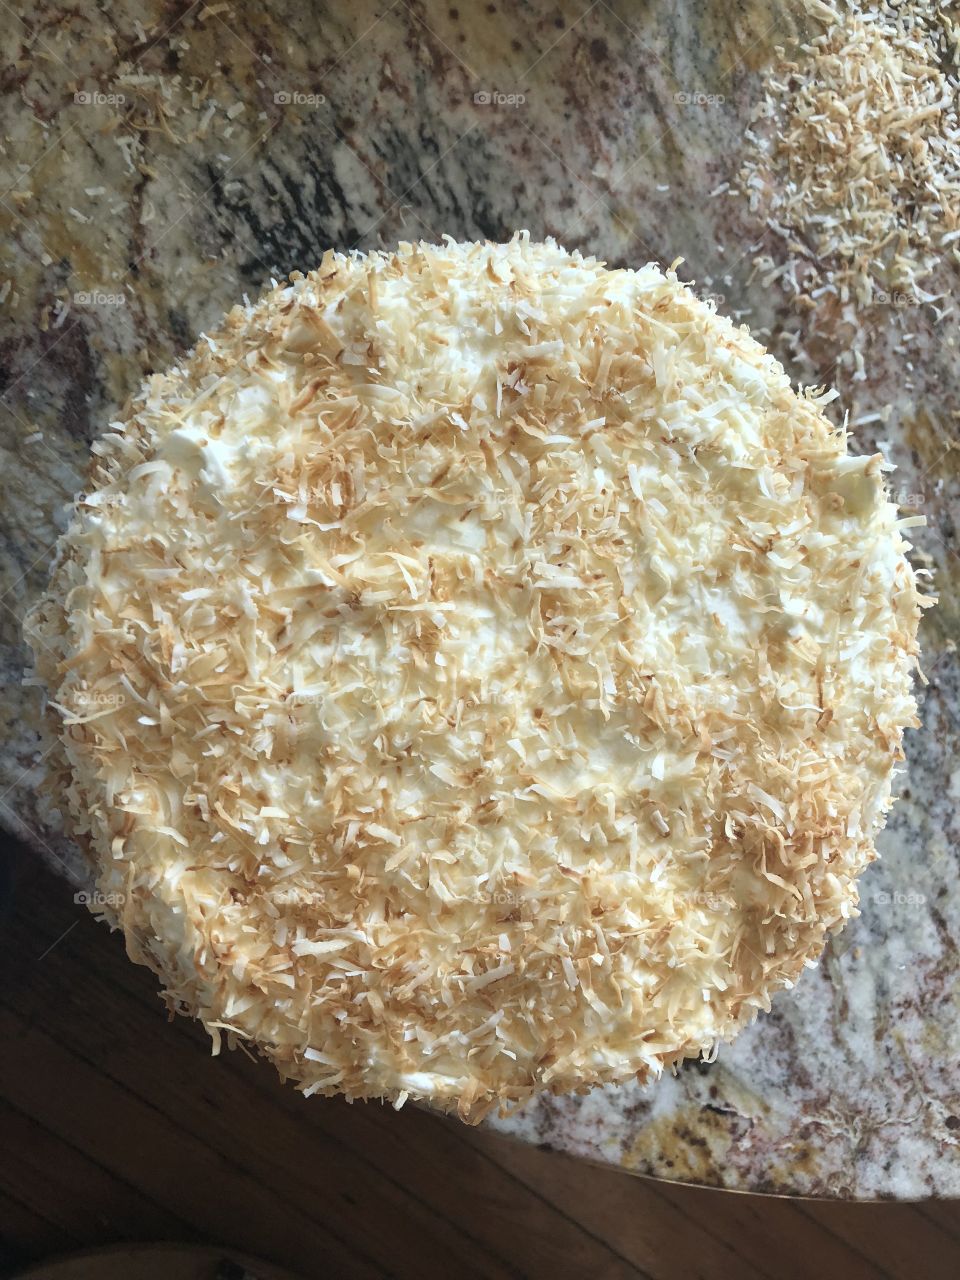 Southern Coconut Comfort Cake